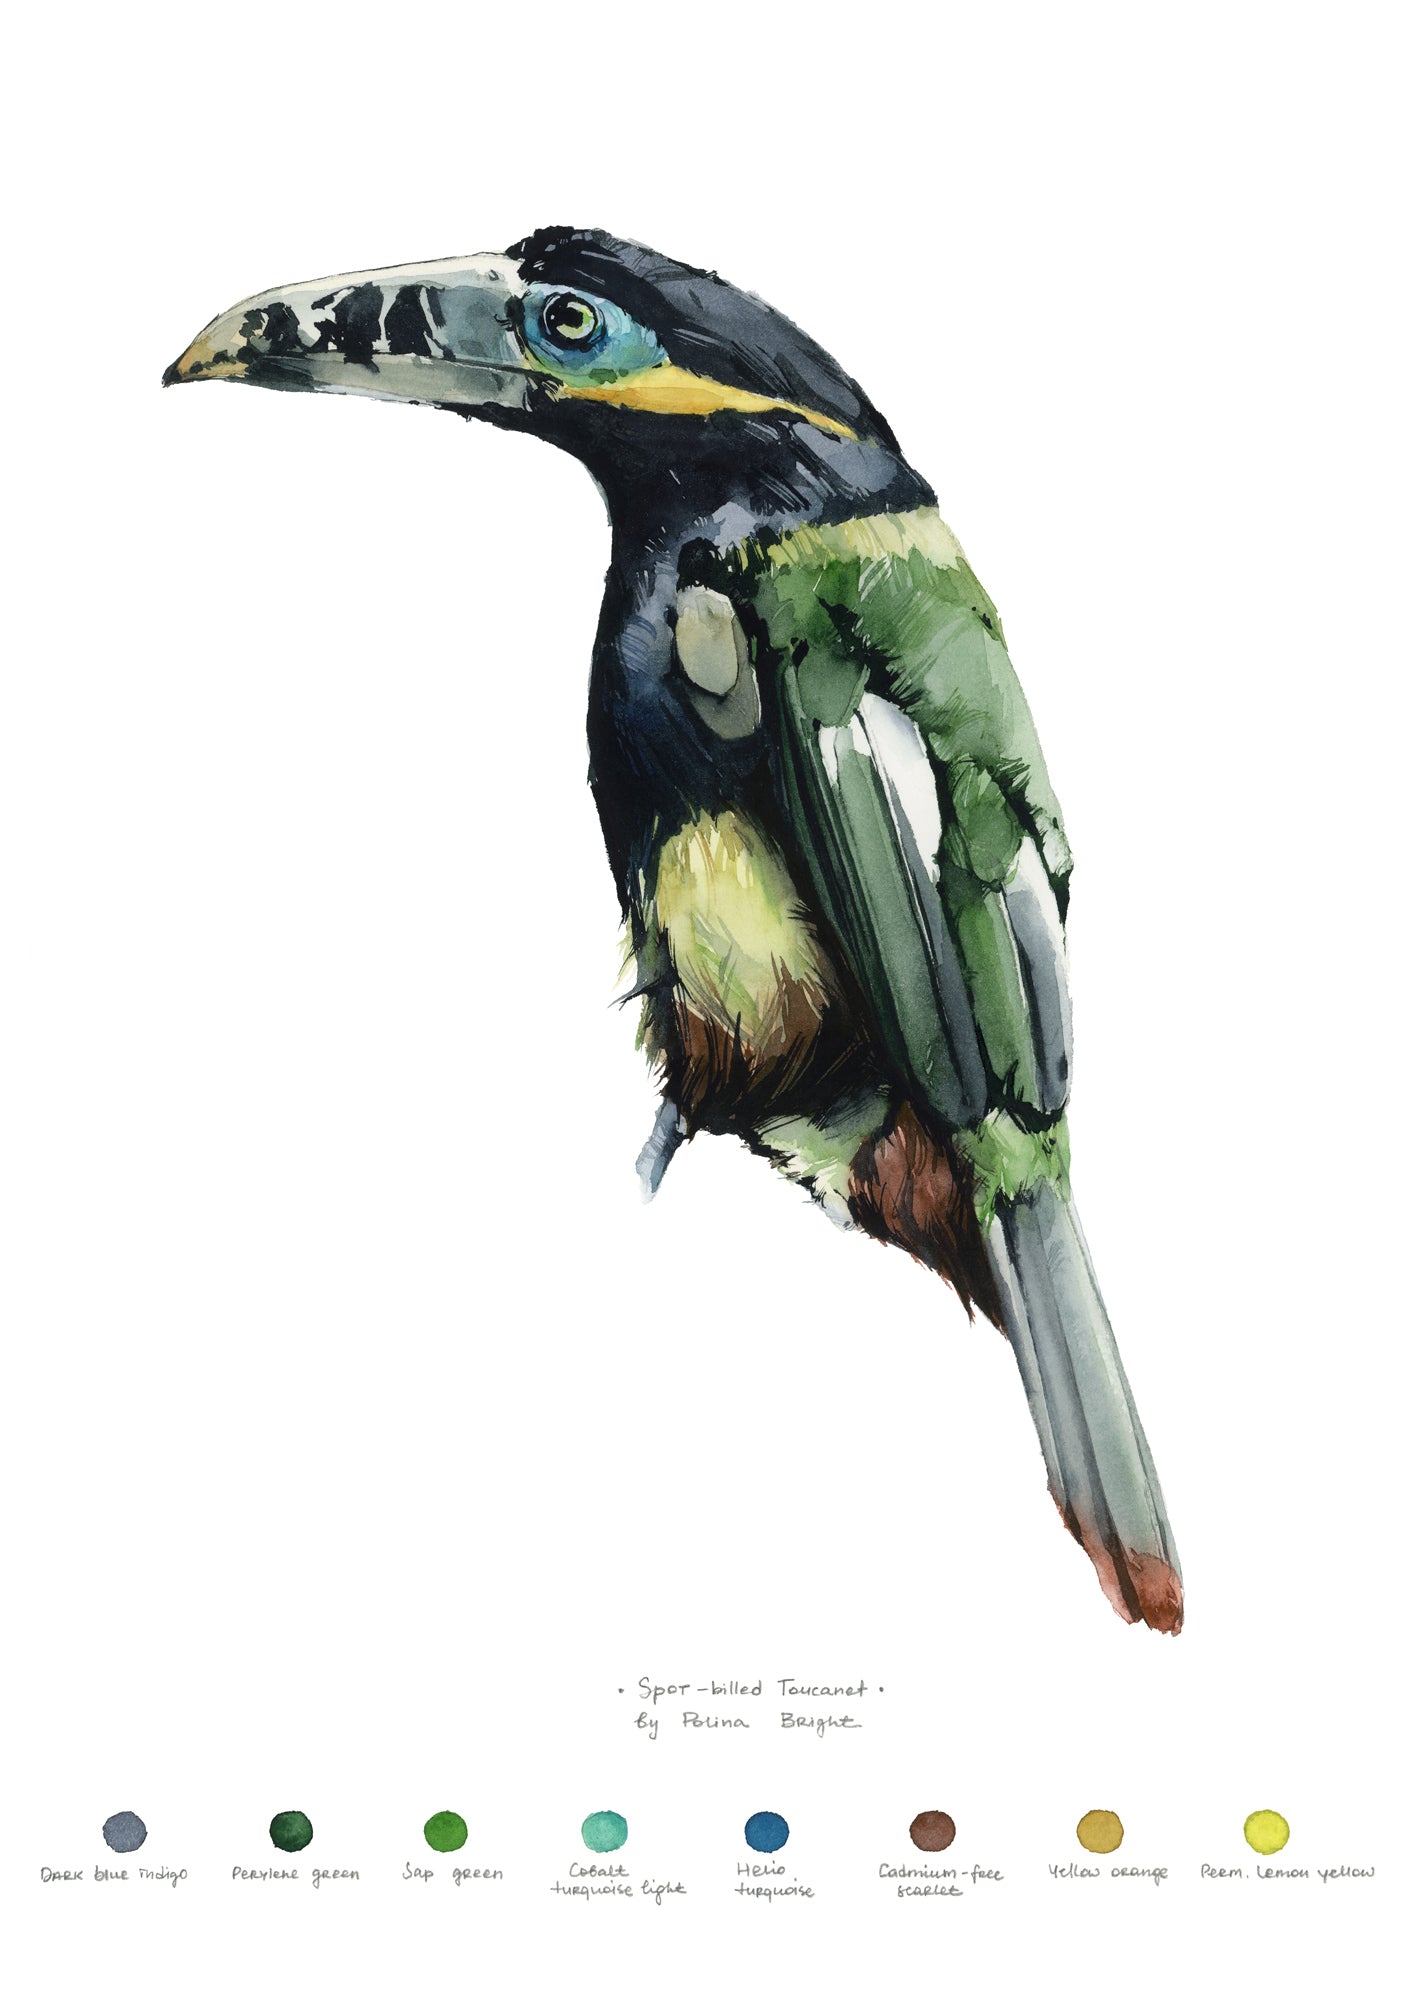 Spot billed toucanet by Polina Bright